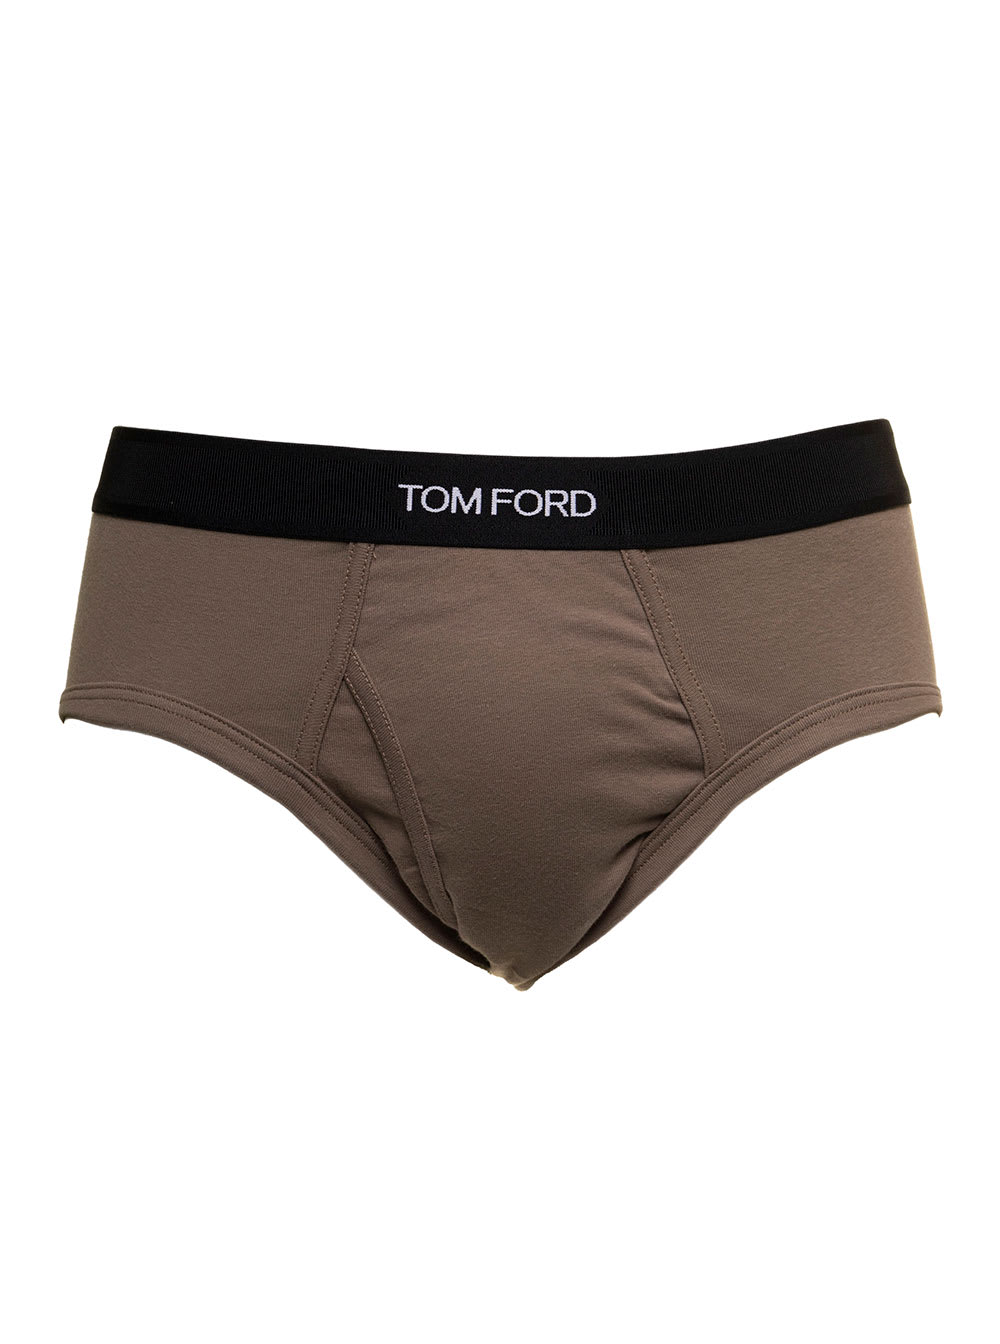 TOM FORD BROWN COTTON BRIEFS WITH LOGO TOM FORD MAN